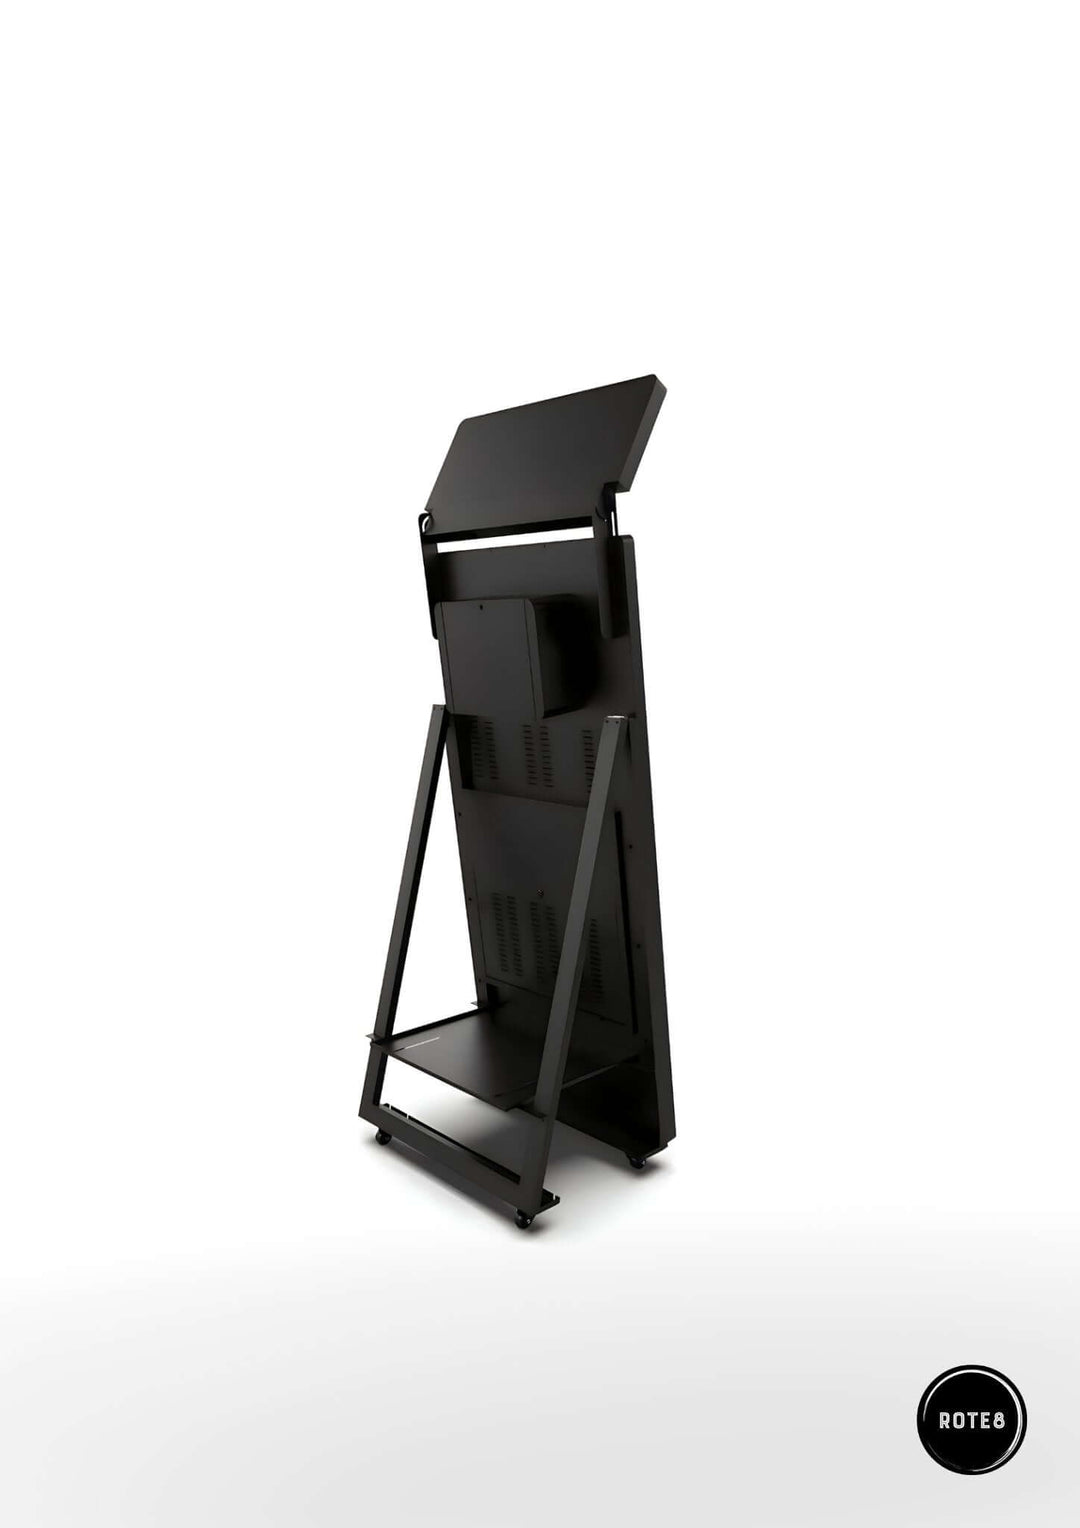 Portable mirror photo booth set up in studio, showcasing its compact and mobile design. Black photo booth stand with multiple shelves 